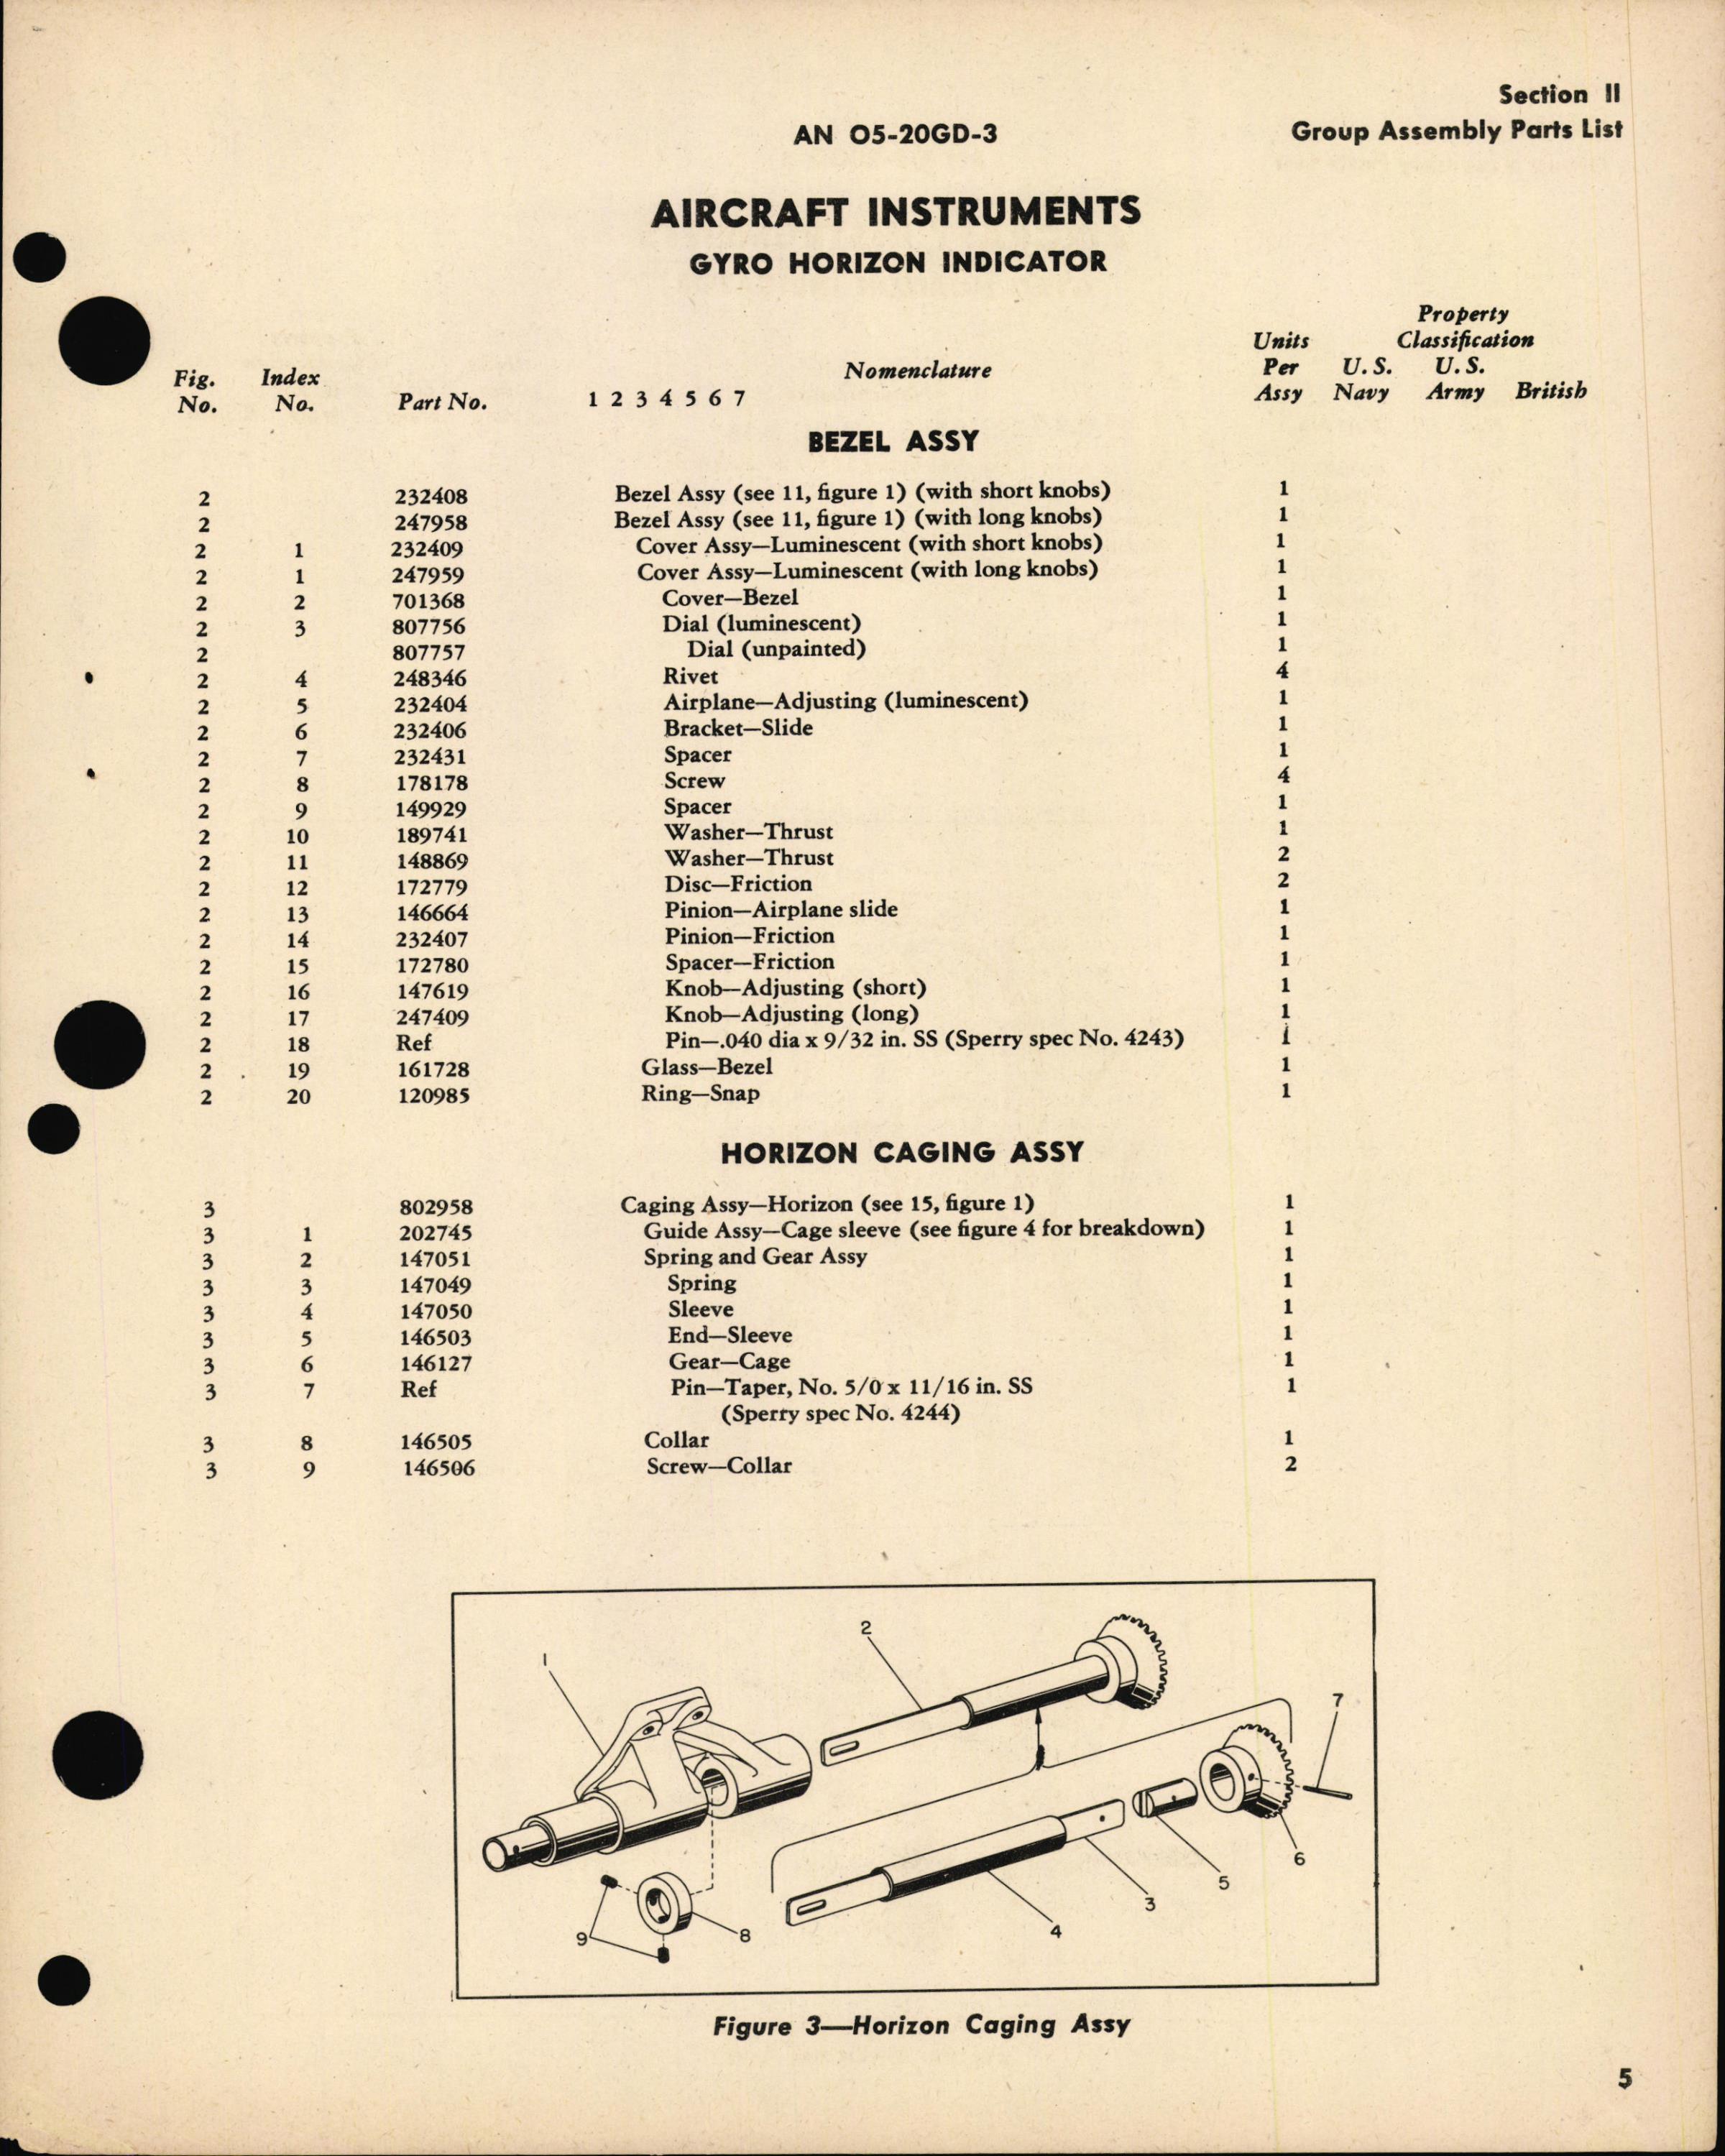 Sample page 9 from AirCorps Library document: Parts Catalog for Gyro Horizon Indicators Part No. 656768